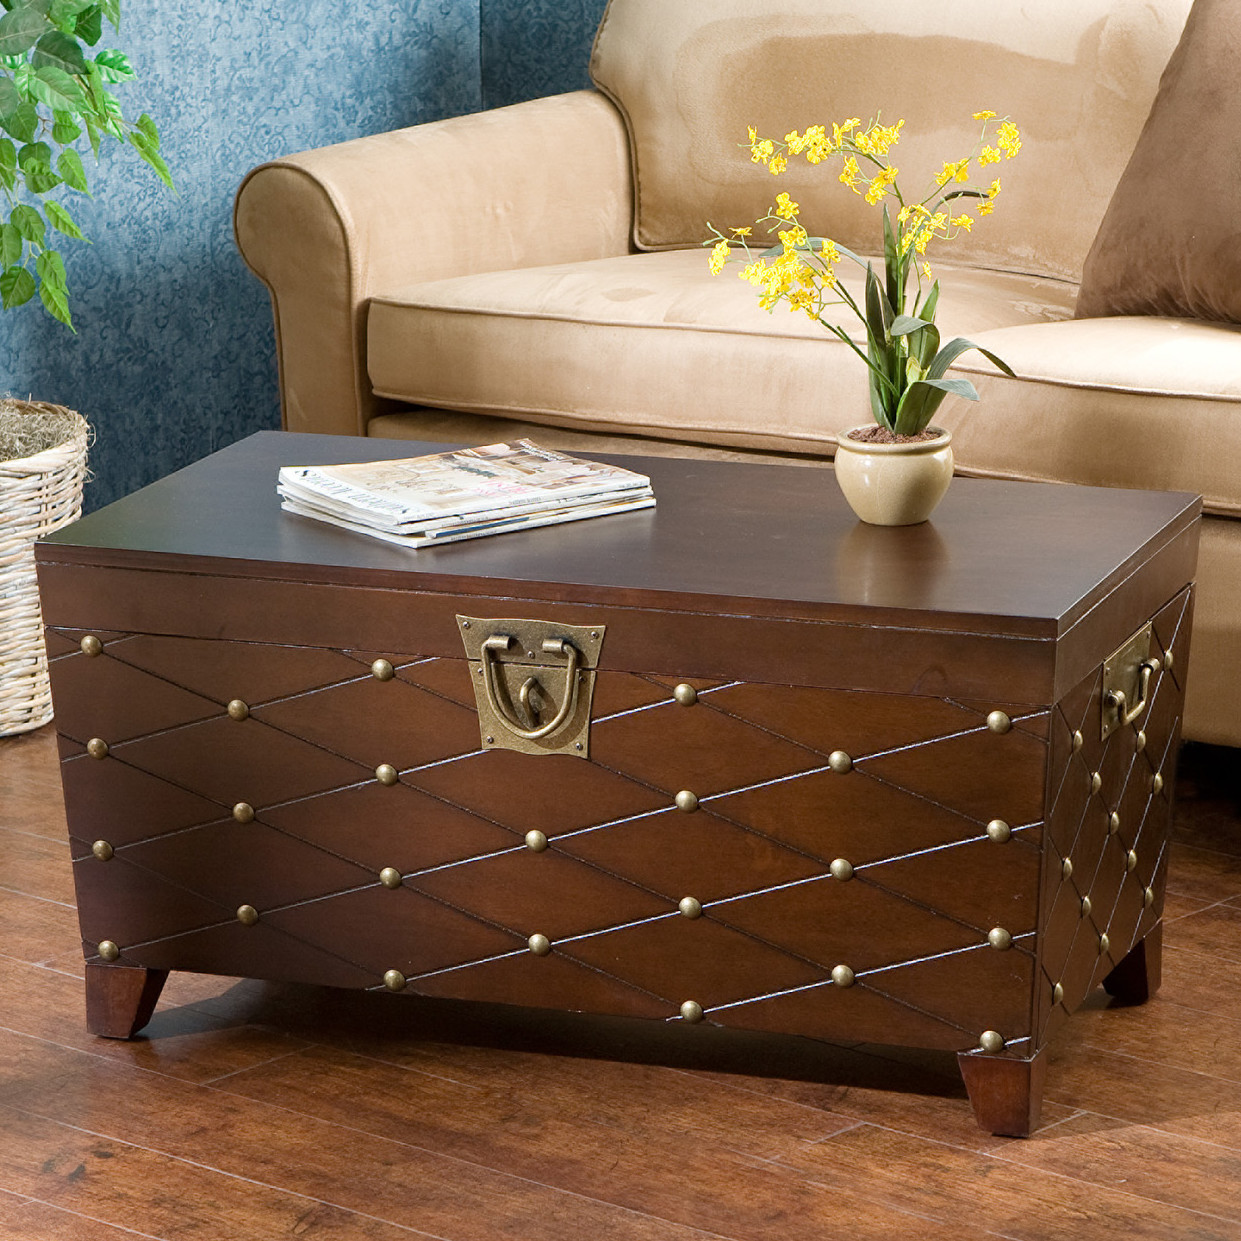 cainhoe nailhead trunk coffee table astoria grand review accent with nailheads furnitures mania mirrored bedside lamps square metal end wicker storage nickel legs west elm wood